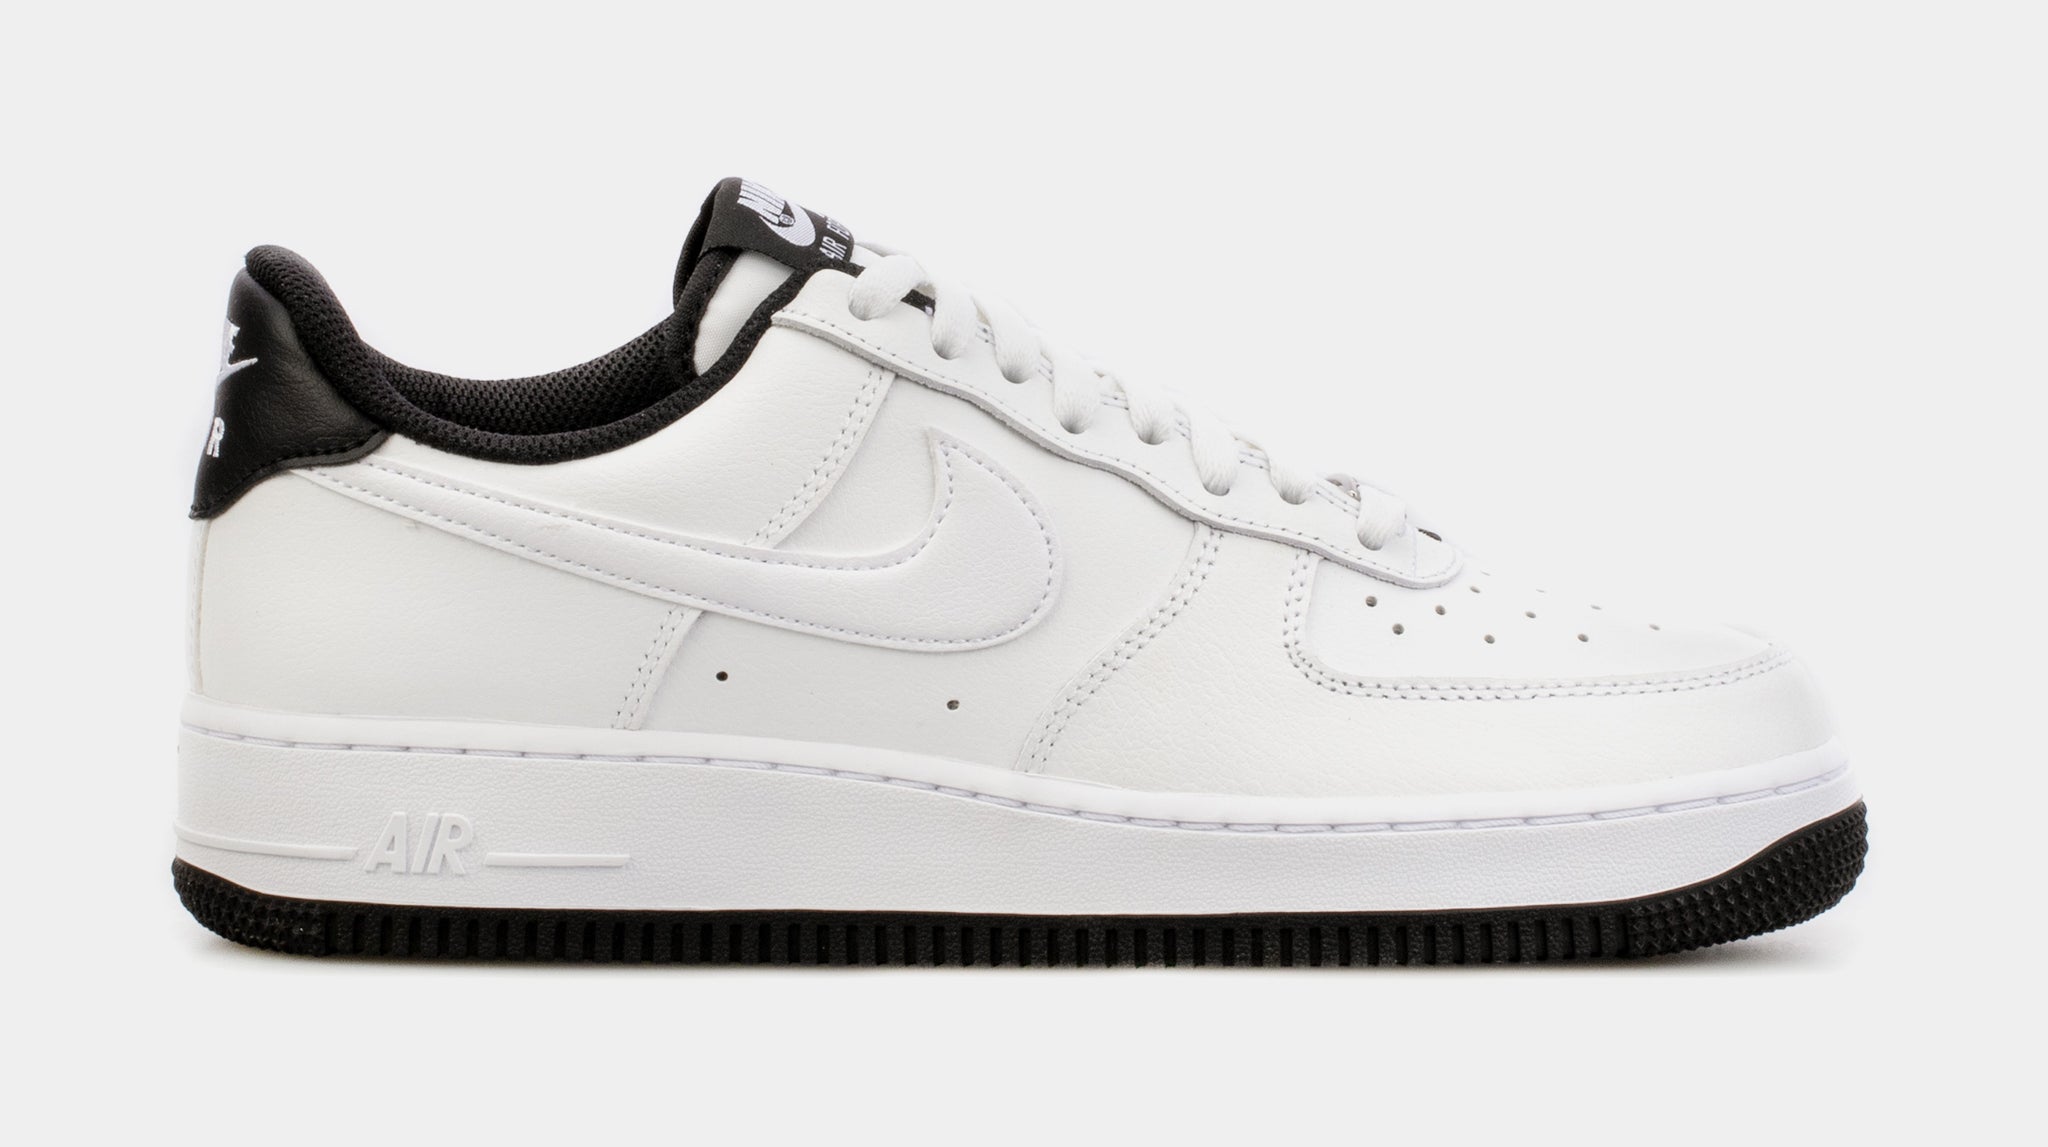 Nike Air Force 1 Low Mens Lifestyle Shoes White Black DR9867-102